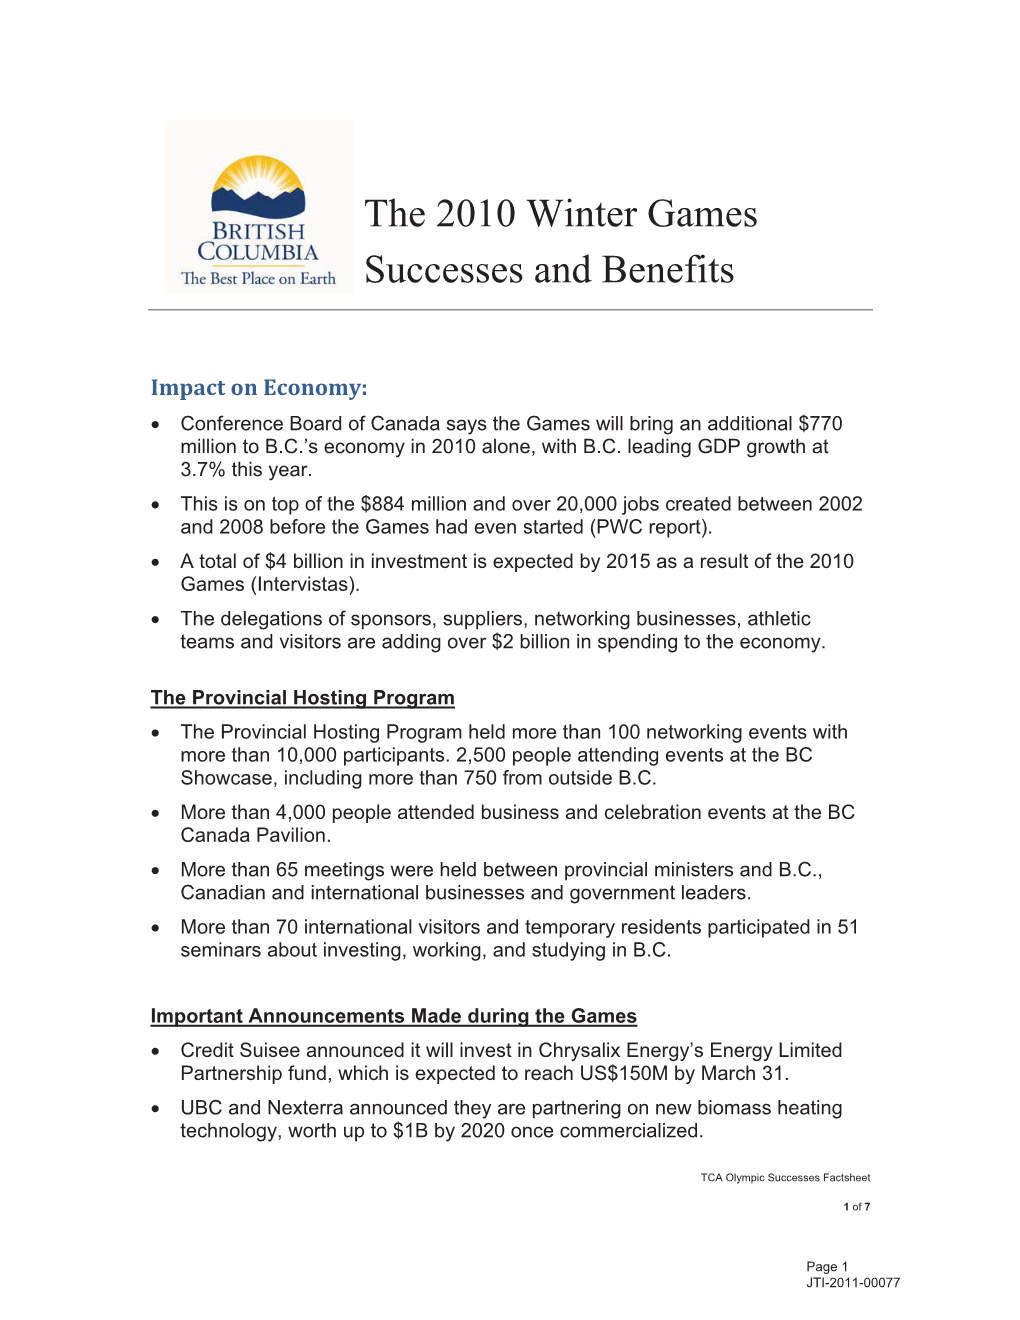 The 2010 Winter Games Successes and Benefits